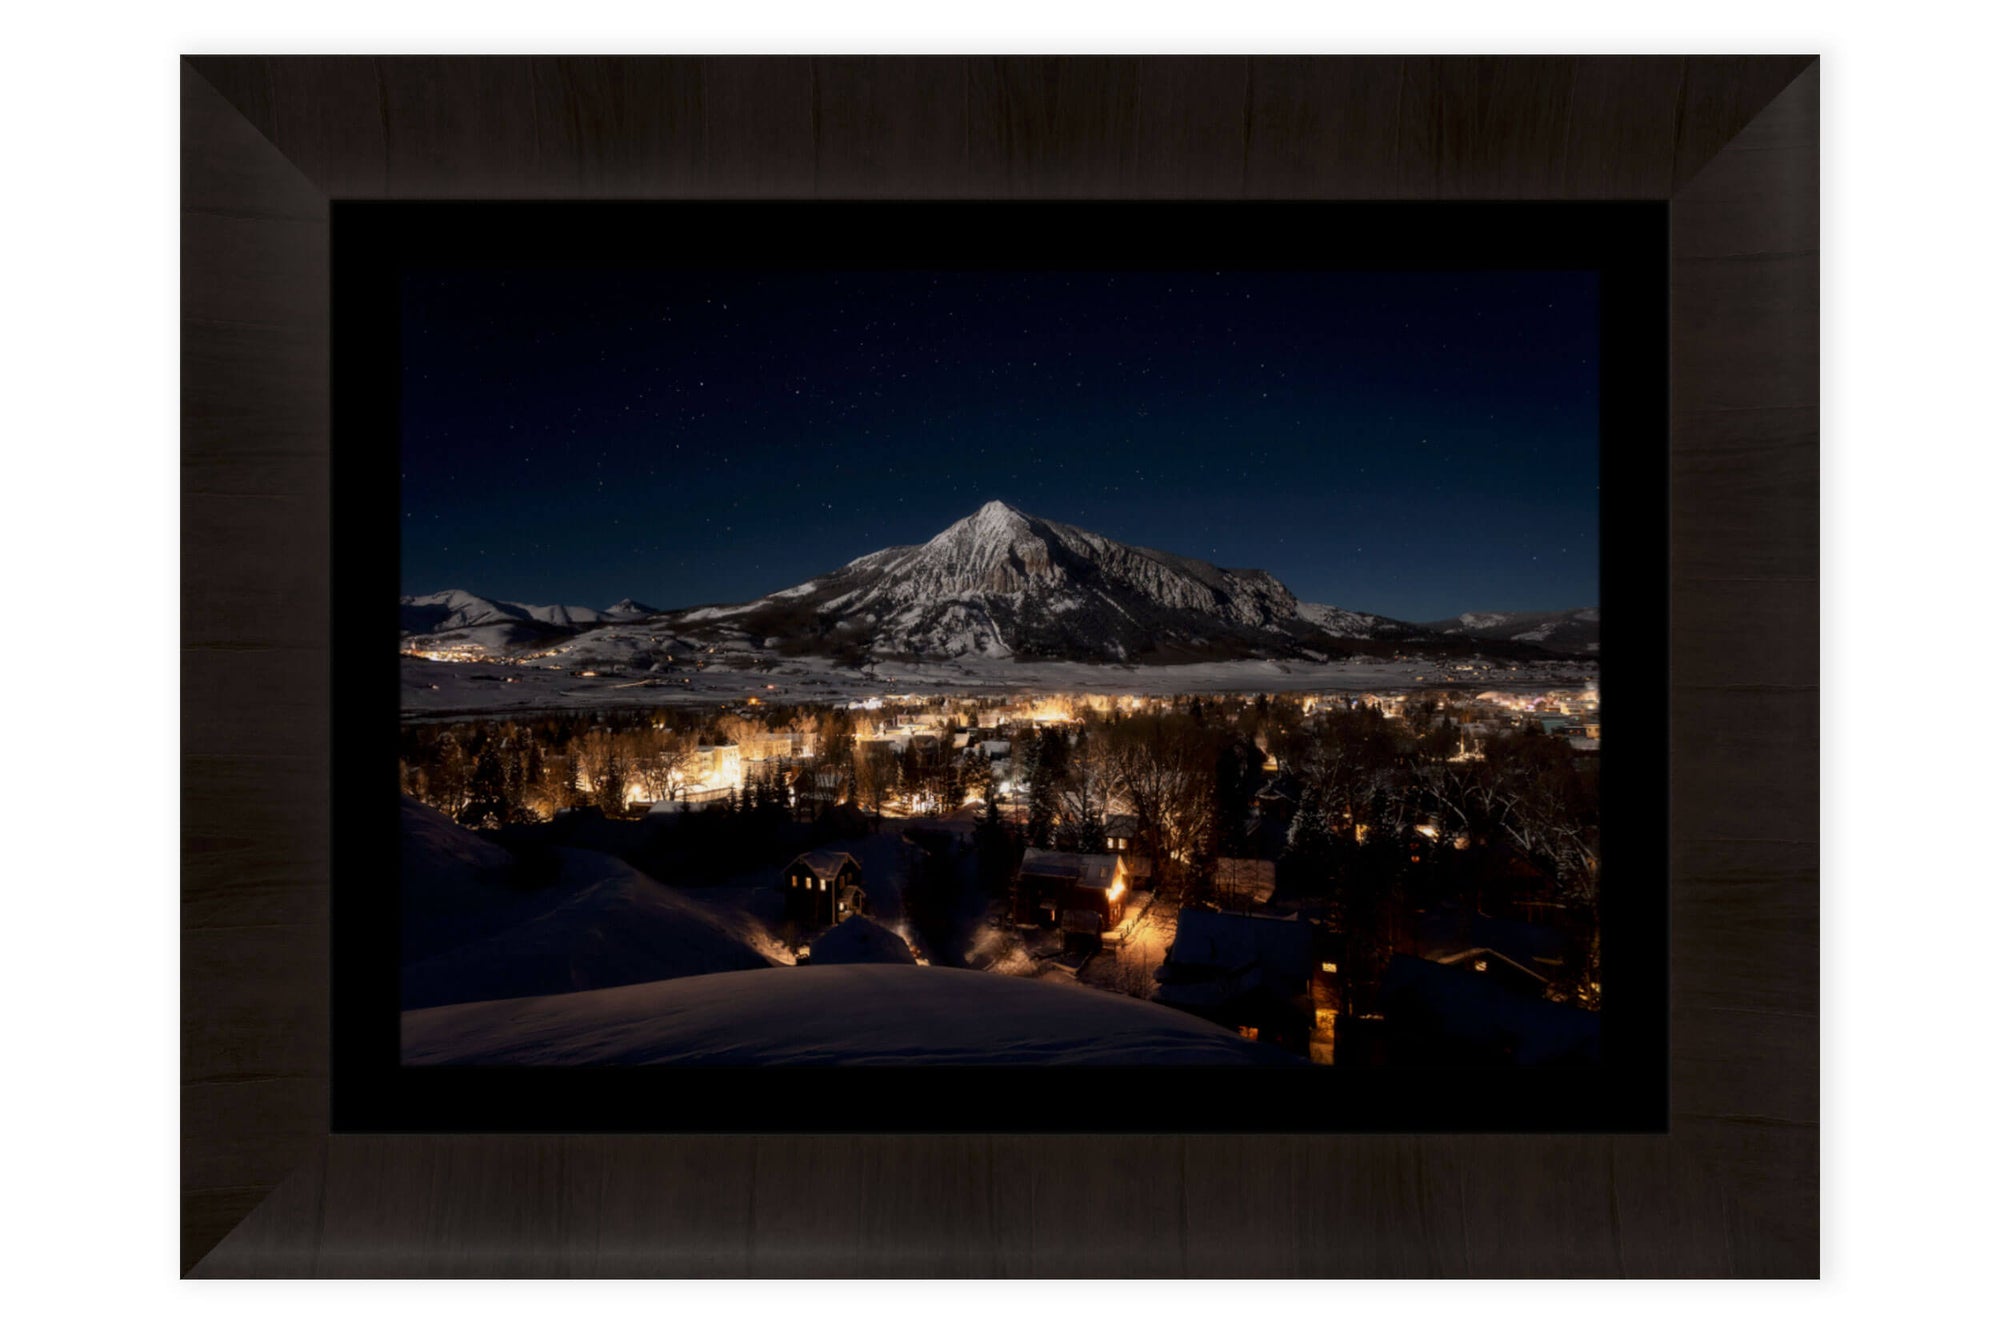 This framed Crested Butte picture shows the Colorado mountain town at night.